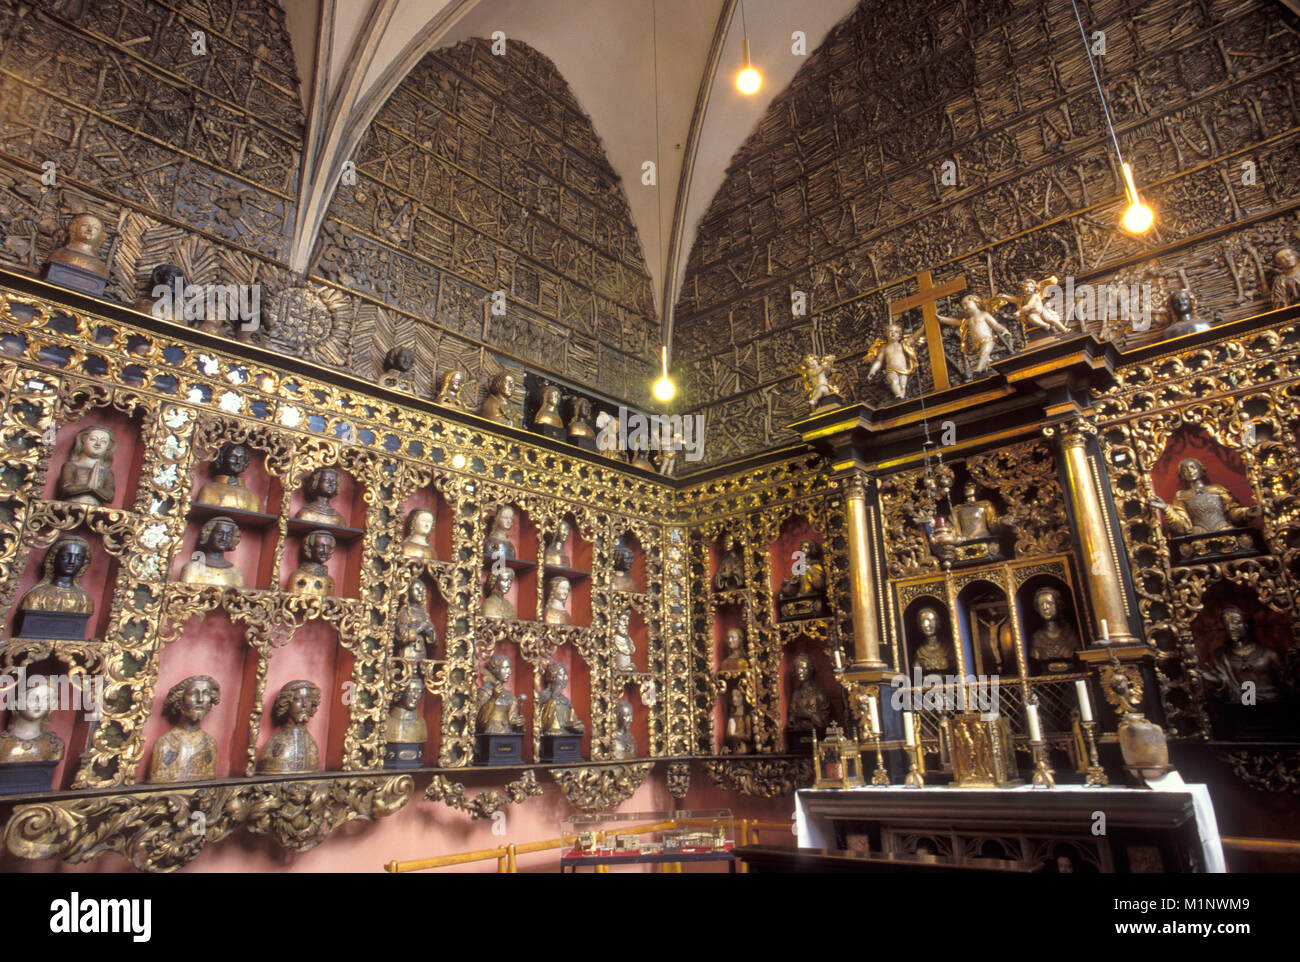 Germany, Cologne, the Golden Chamber of the church Saint Ursula, room with relics consist of human bones, decoration of the buttress arches, altar.  D Stock Photo